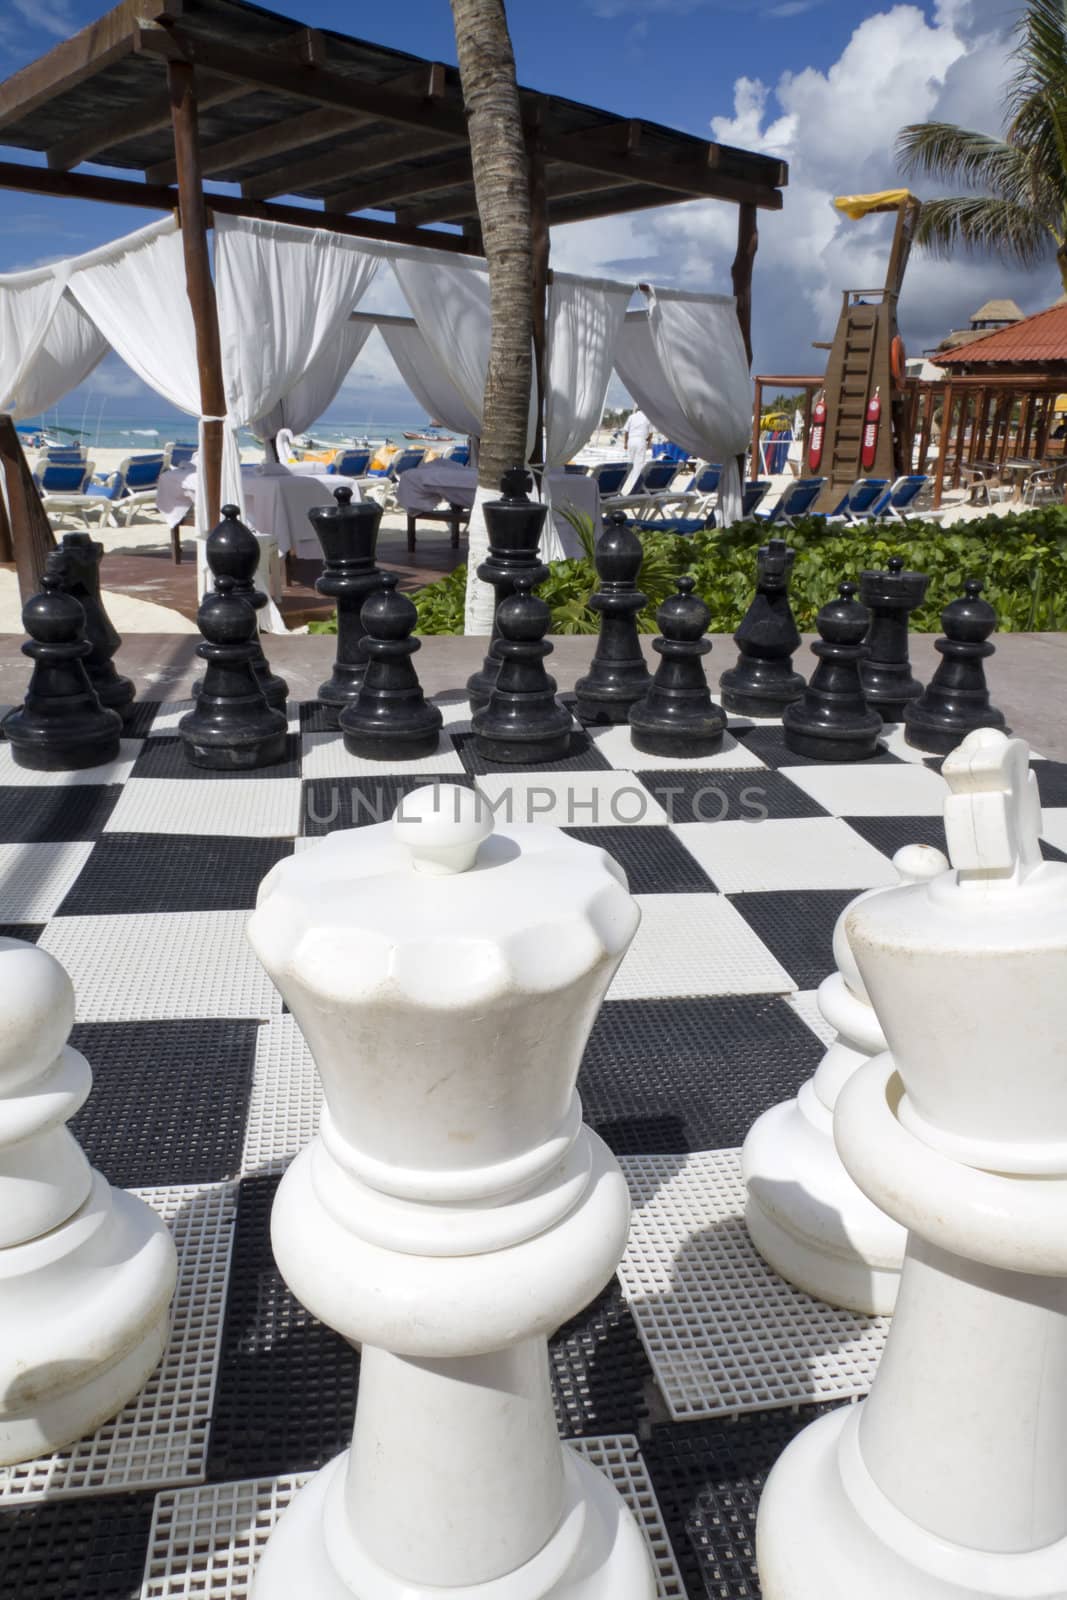 A large black and white chess board 